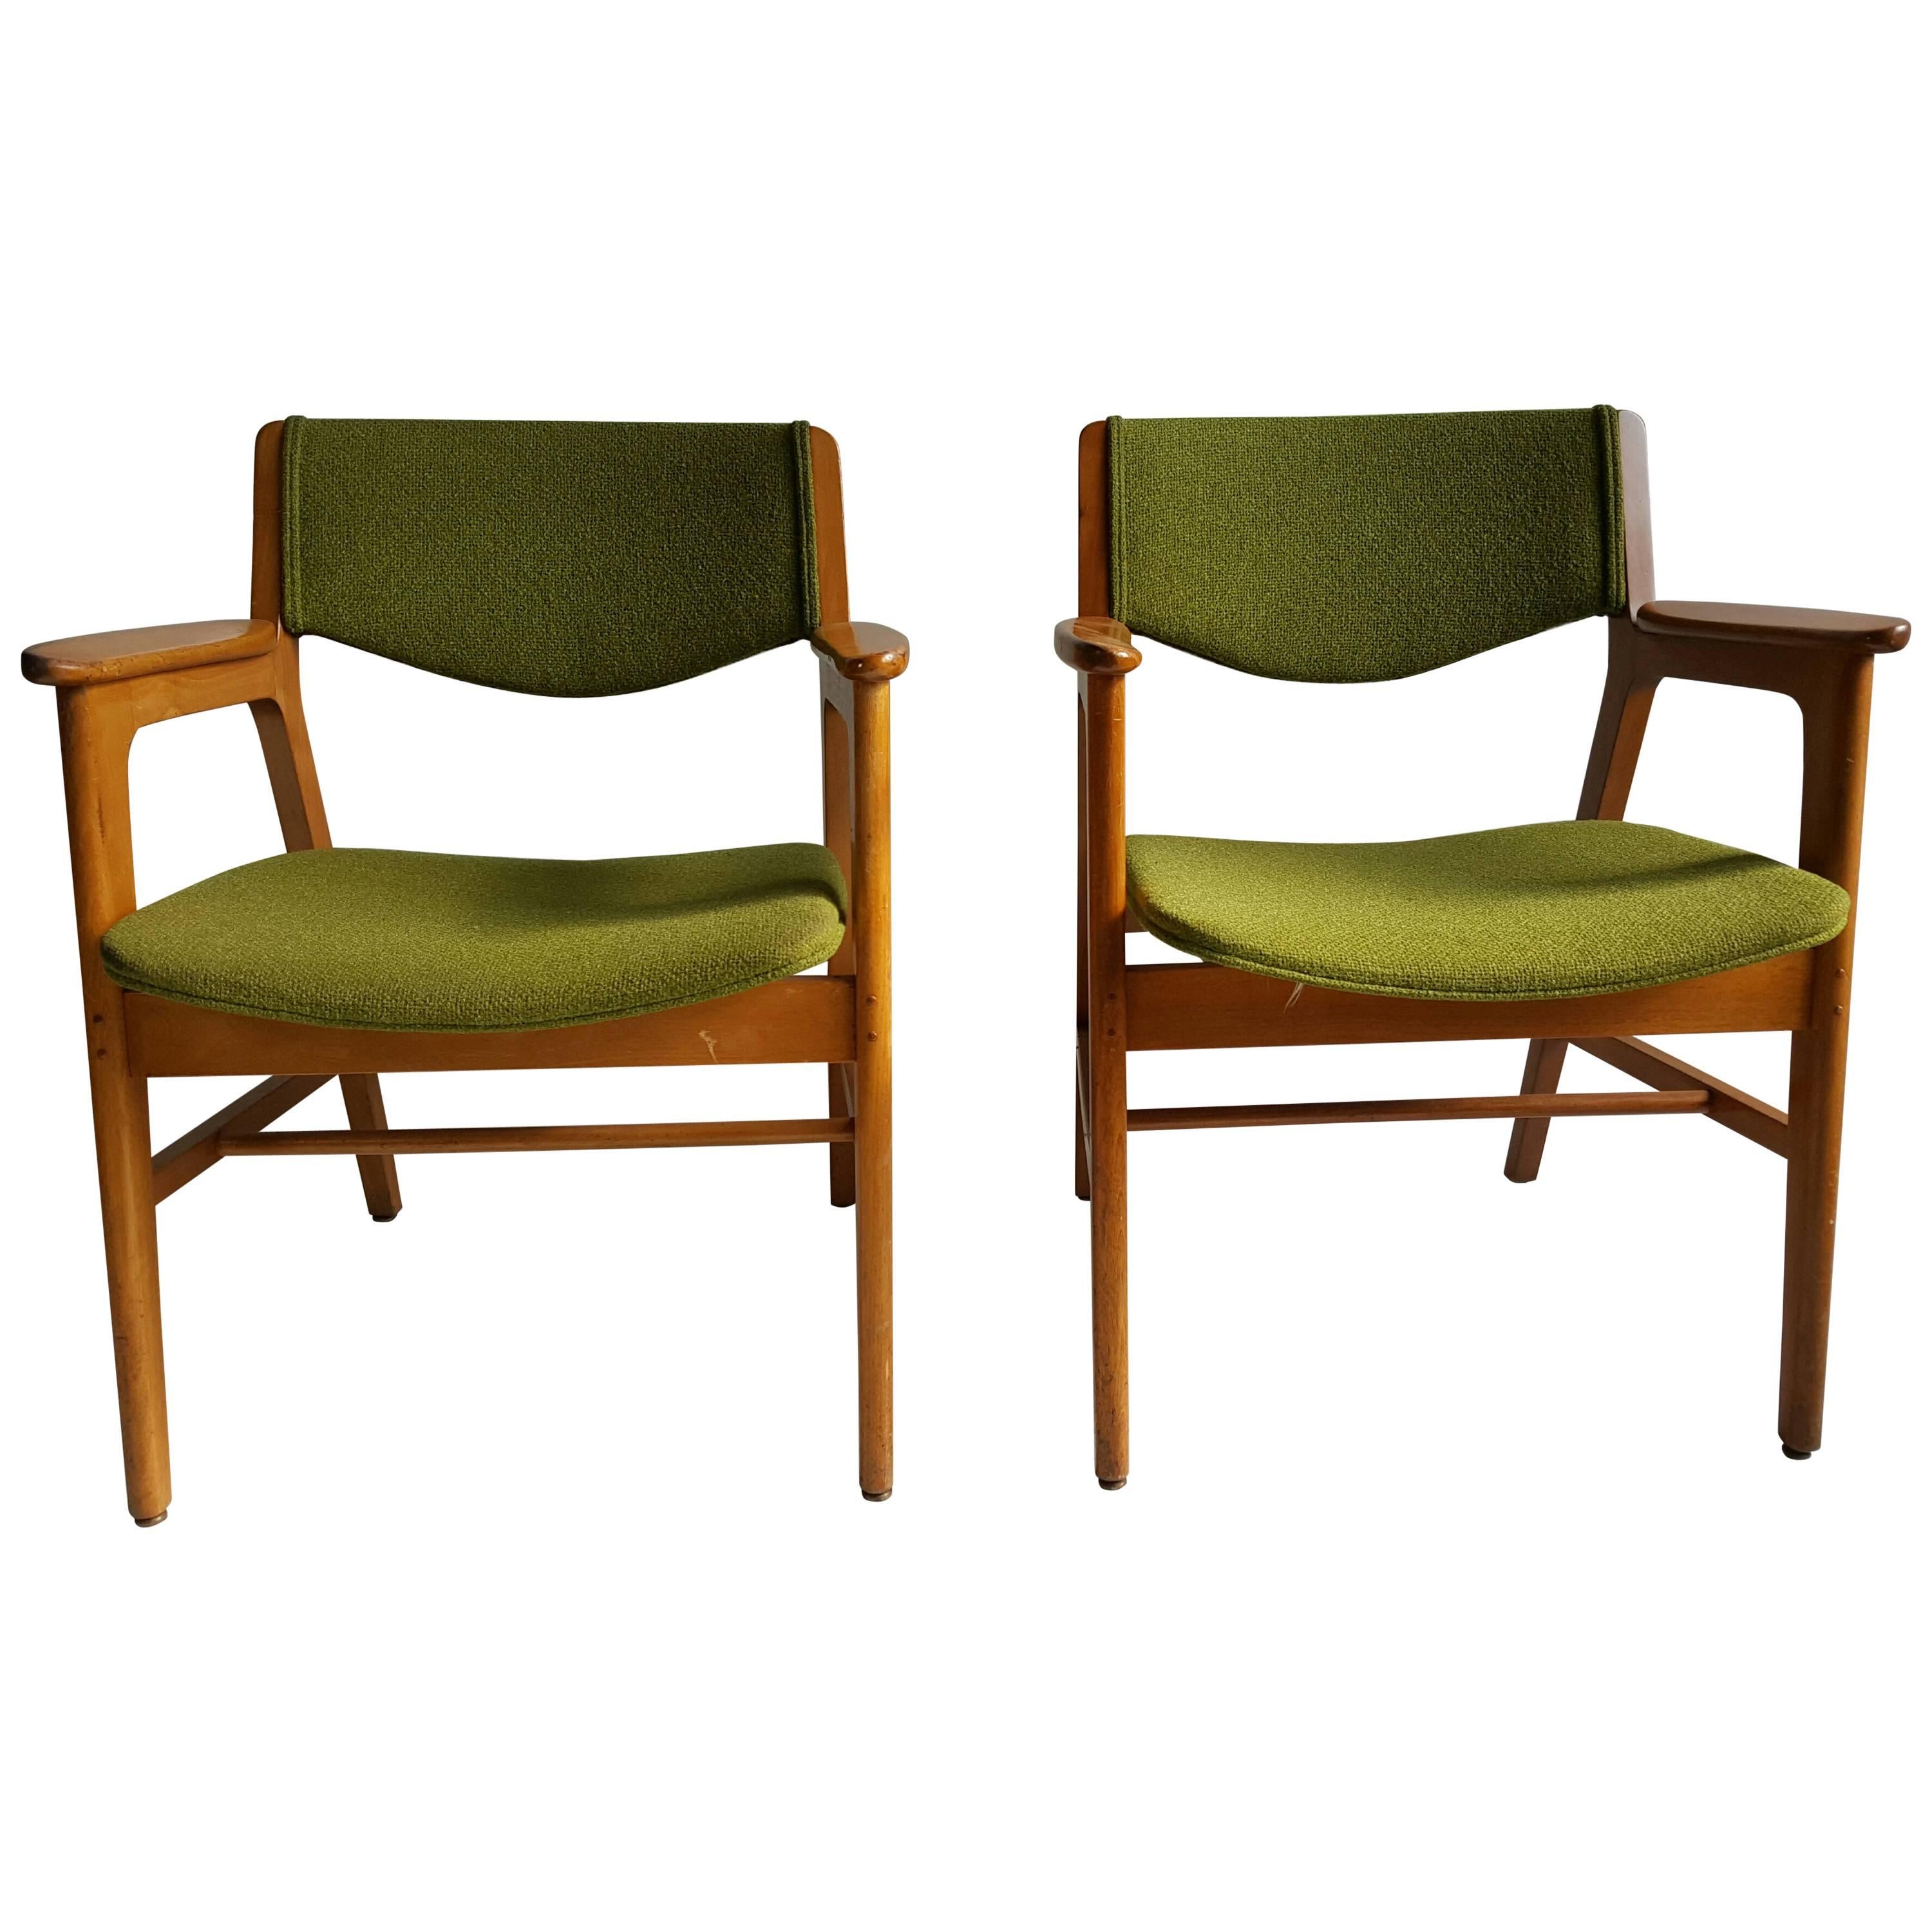 Classic Mid-Century Modern Armchairs, Manufactured by W.H. Gunlocke Chair Co.